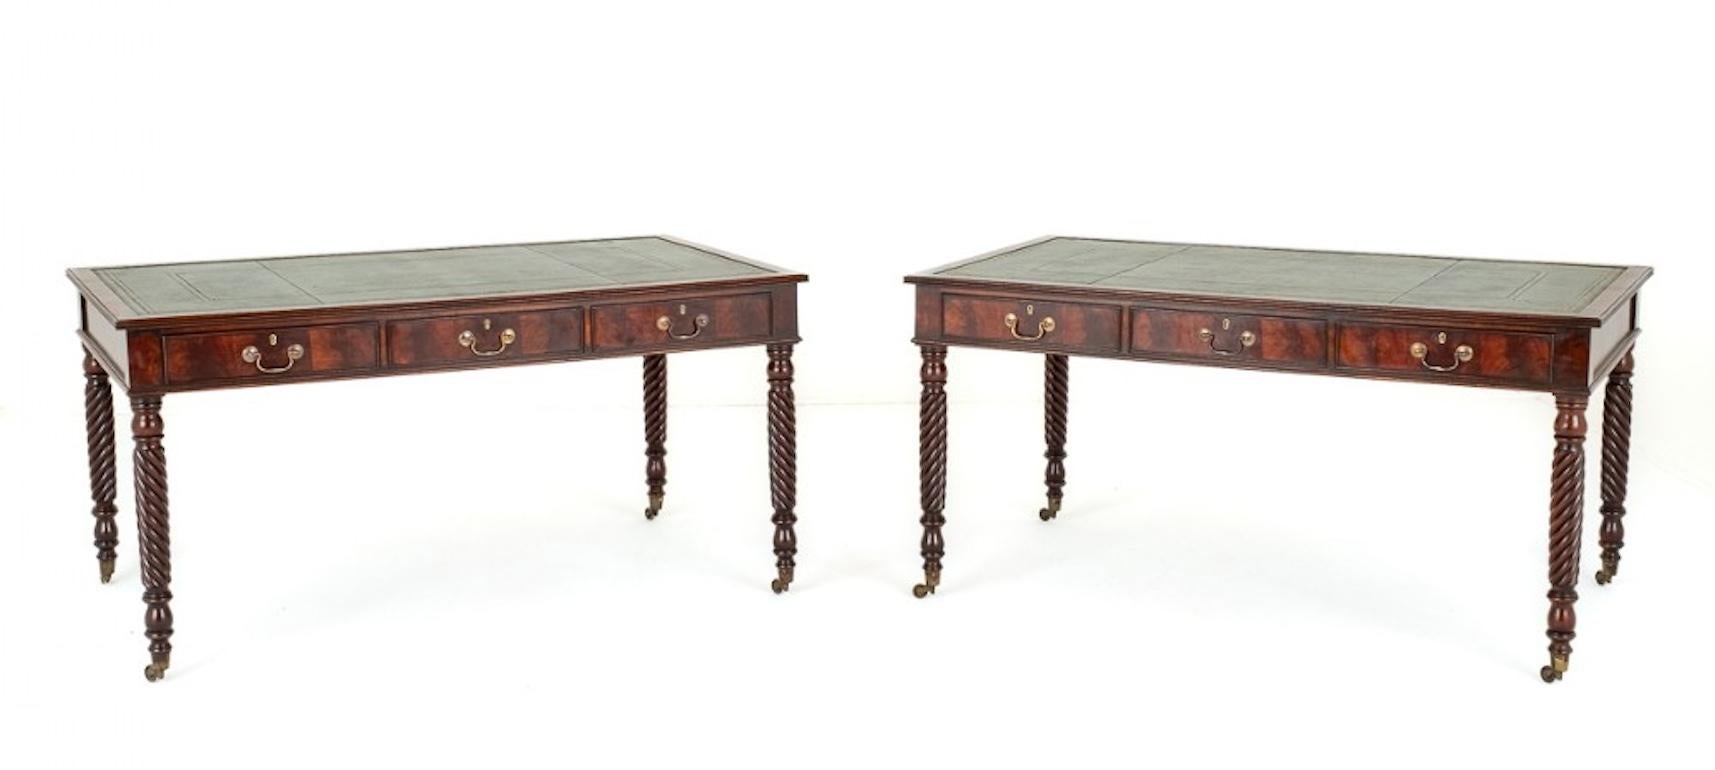 A Good Pair of Mahogany Writing Tables.
These Writing Tables Feature Turned Legs with Barley Twist Decoration and Brass Castors.
Circa 1850
Each of the Tables Having 3 Mahogany Lined Drawers With Brass Swan Neck Handles.
The Tops of the Tables